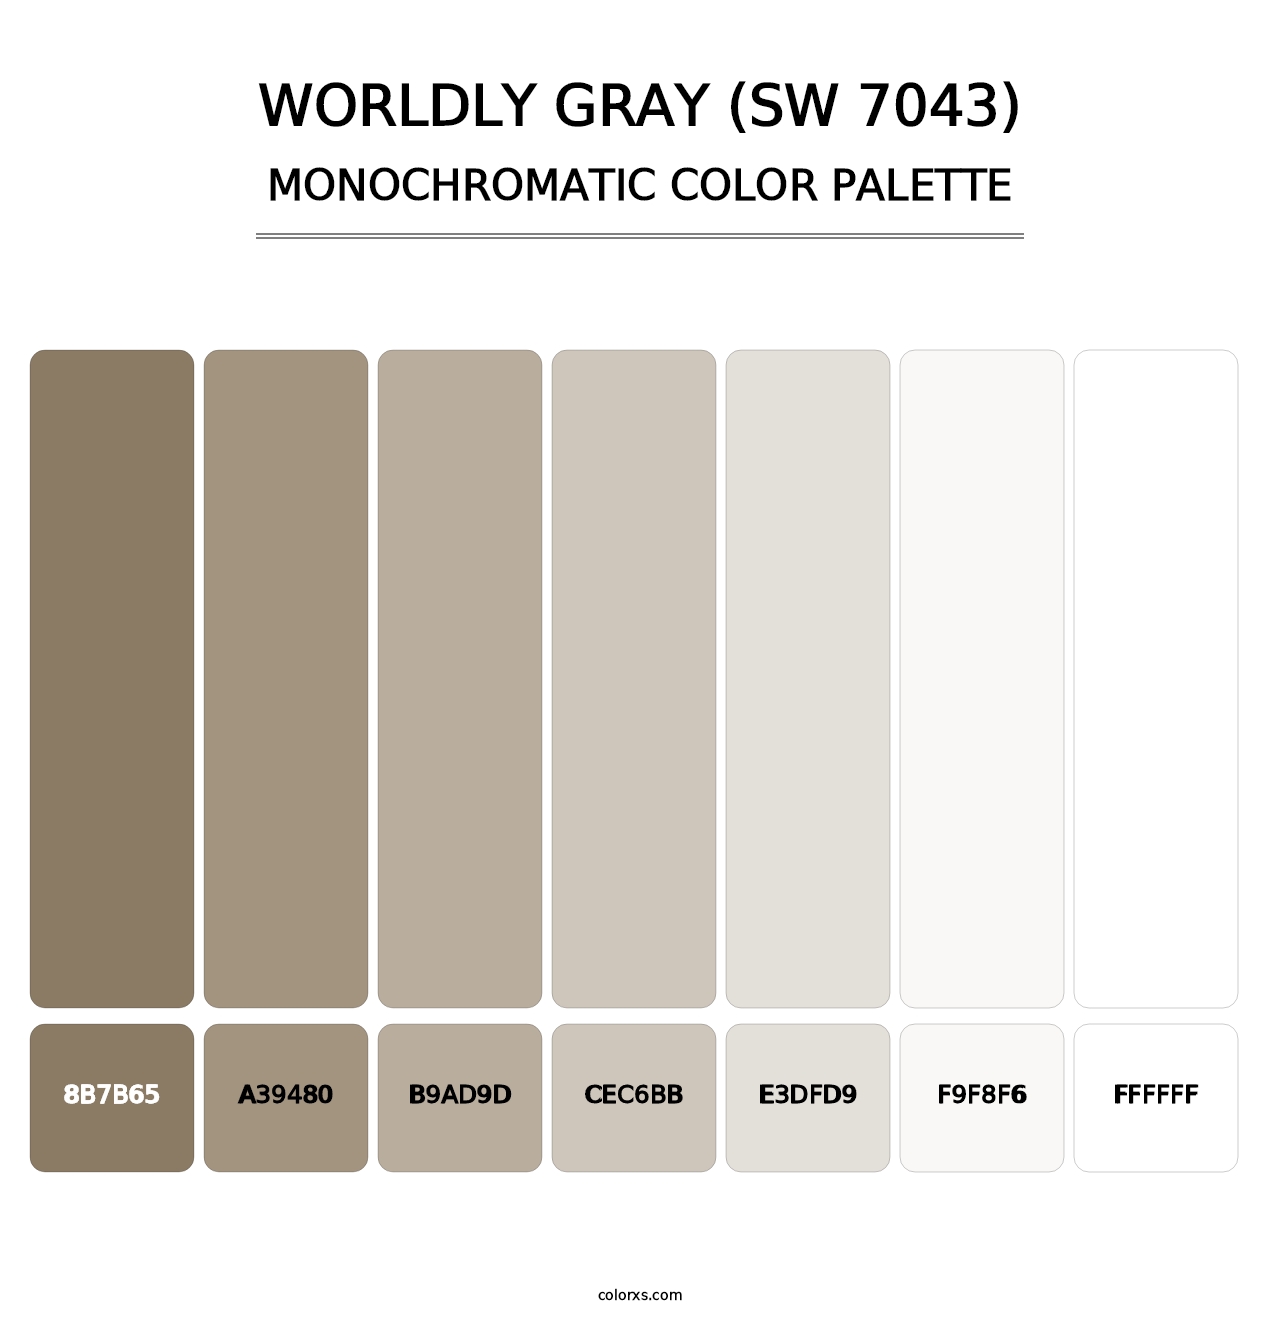 Worldly Gray (SW 7043) - Monochromatic Color Palette